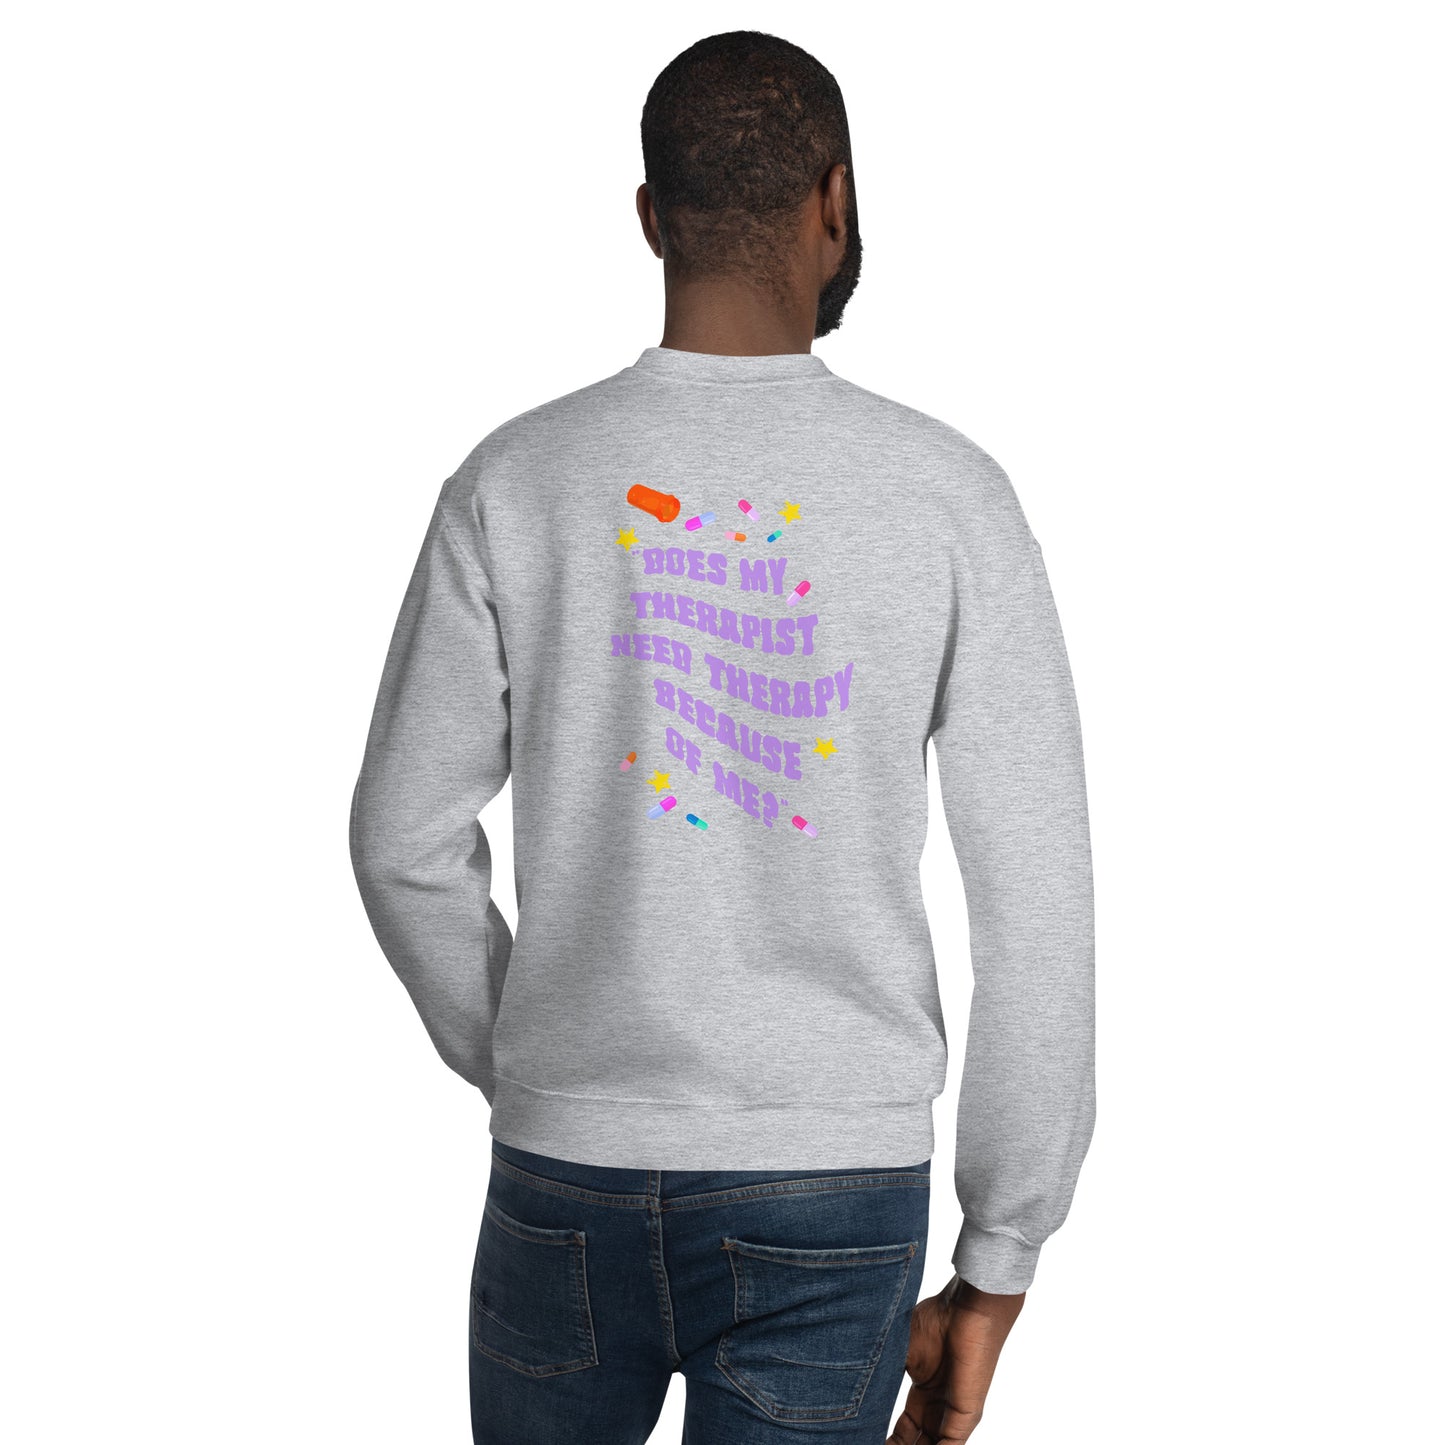 Unisex She Is Jules "Do Therapists?" Crew Neck - Embroidered Logo, Printed Back